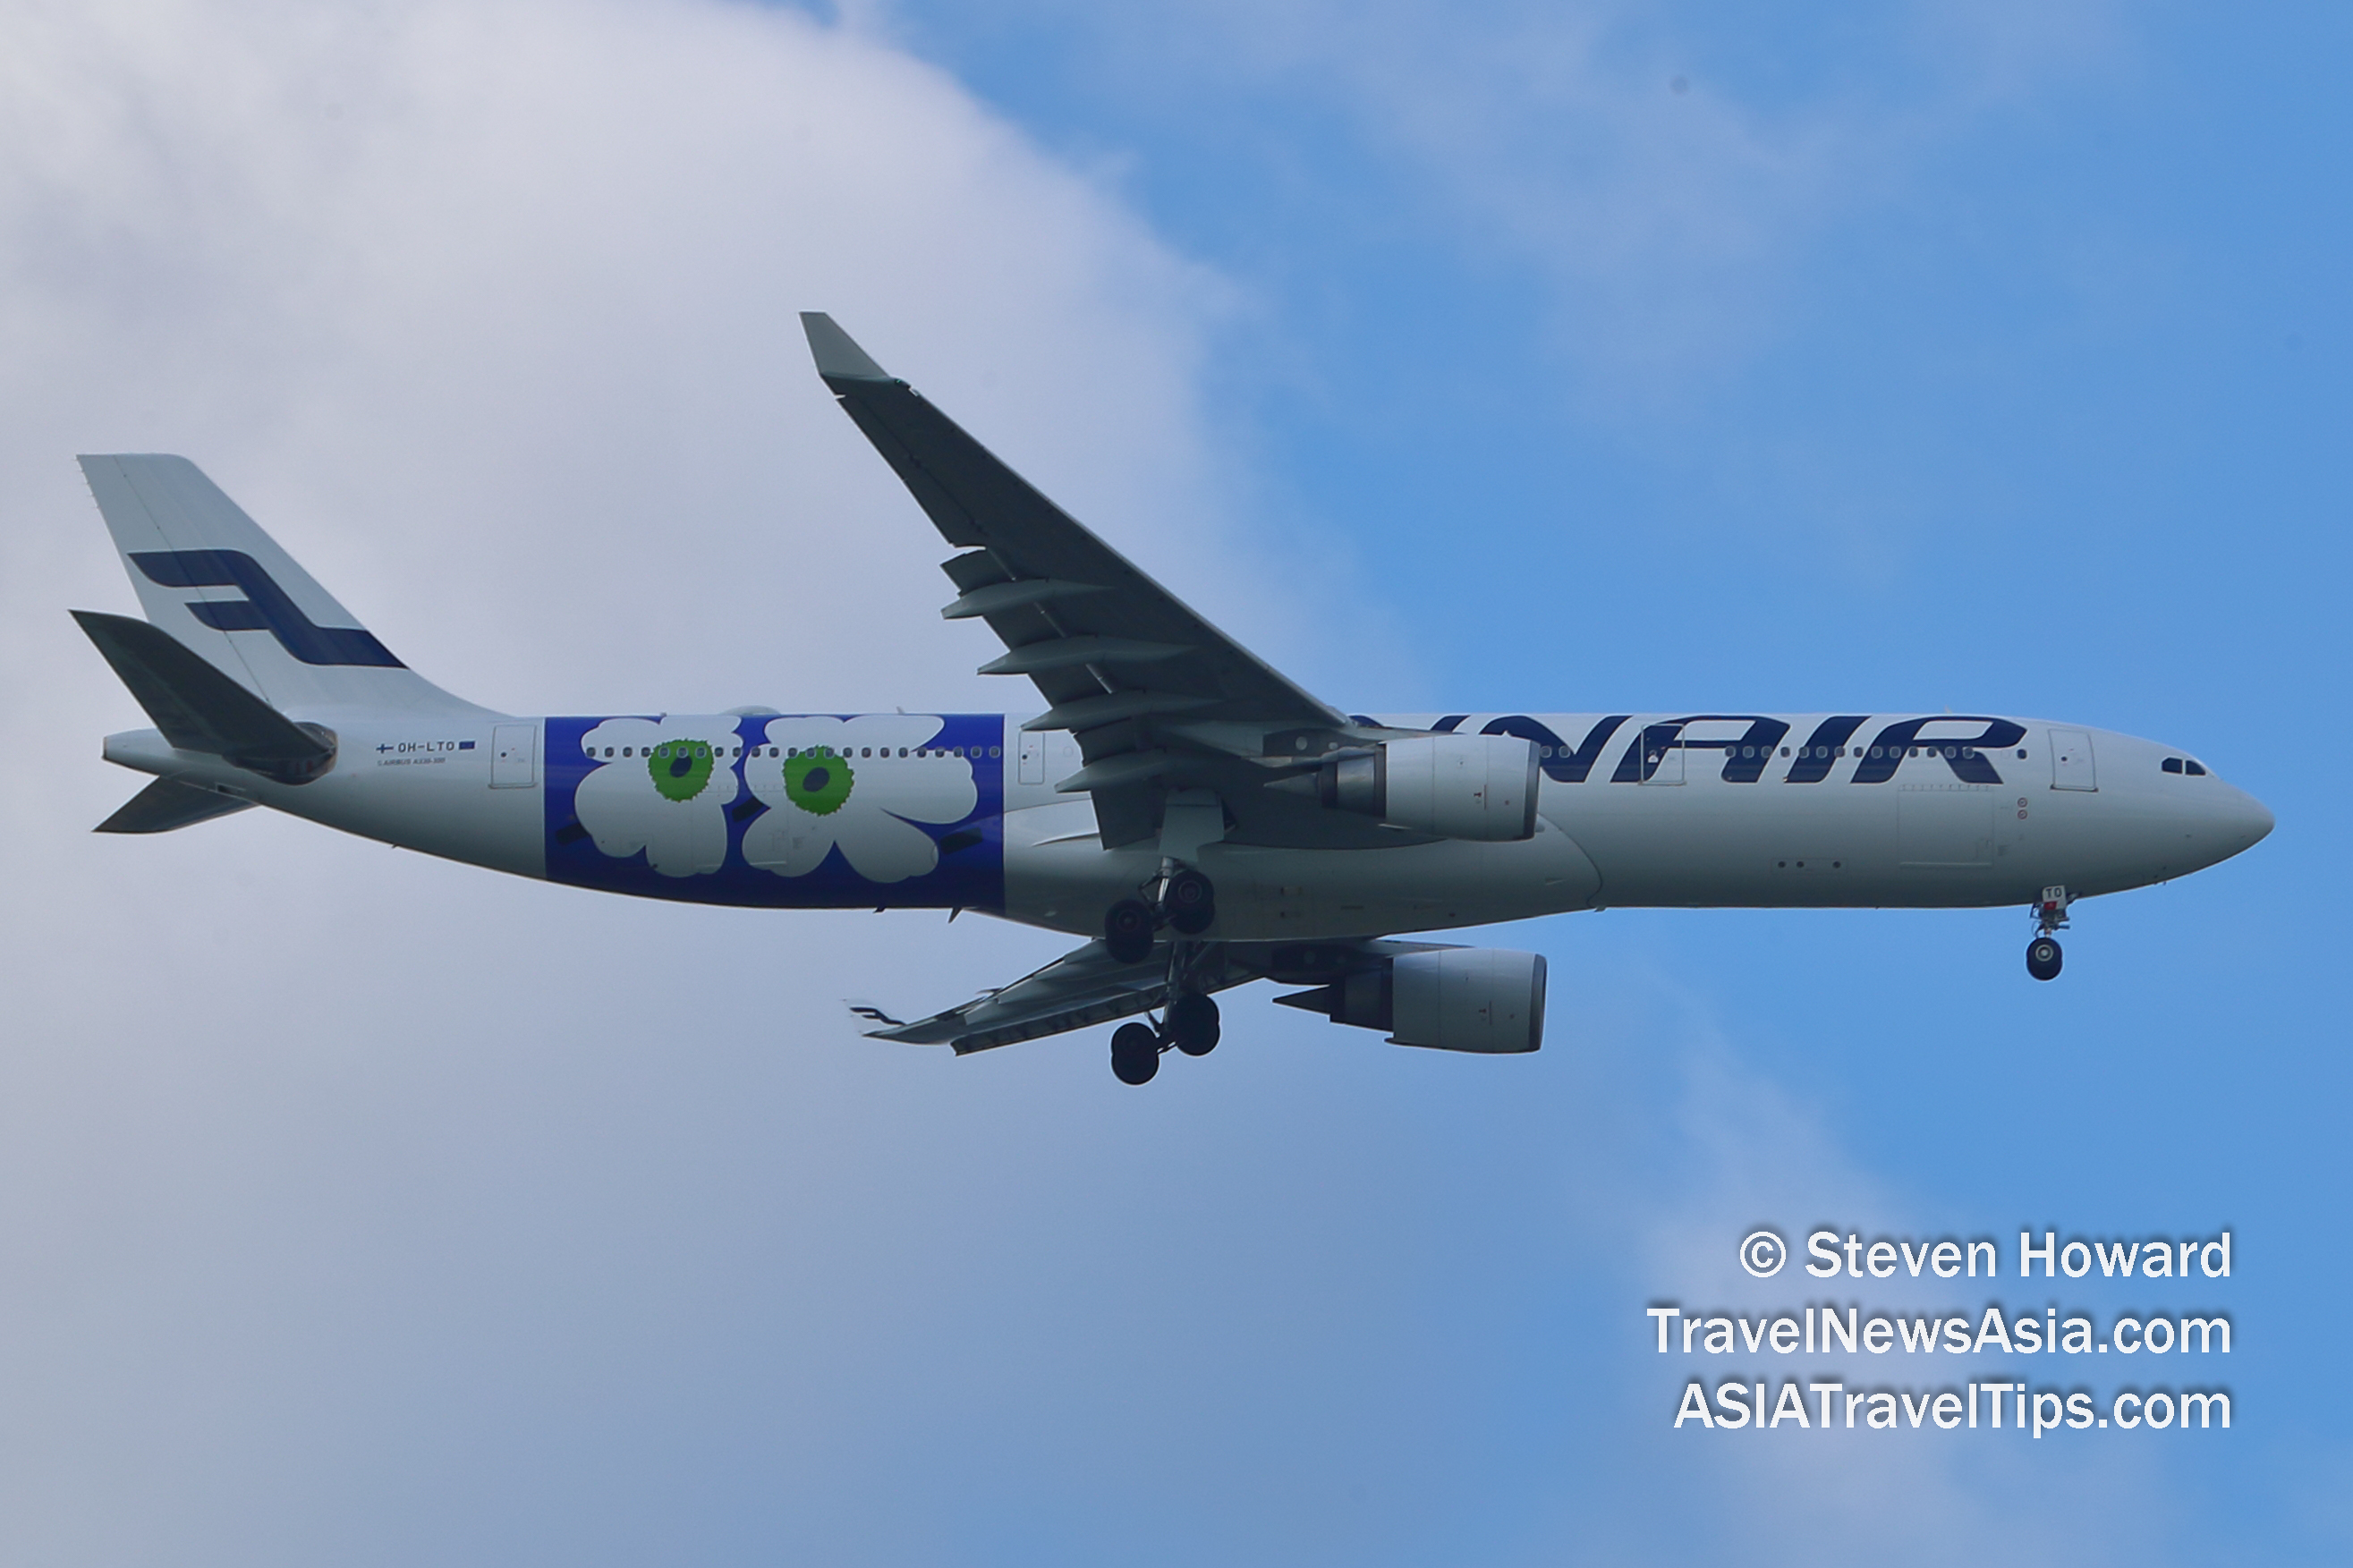 Finnair Airbus A330 reg: OH-LTO. Picture by Steven Howard of TravelNewsAsia.com Click to enlarge.